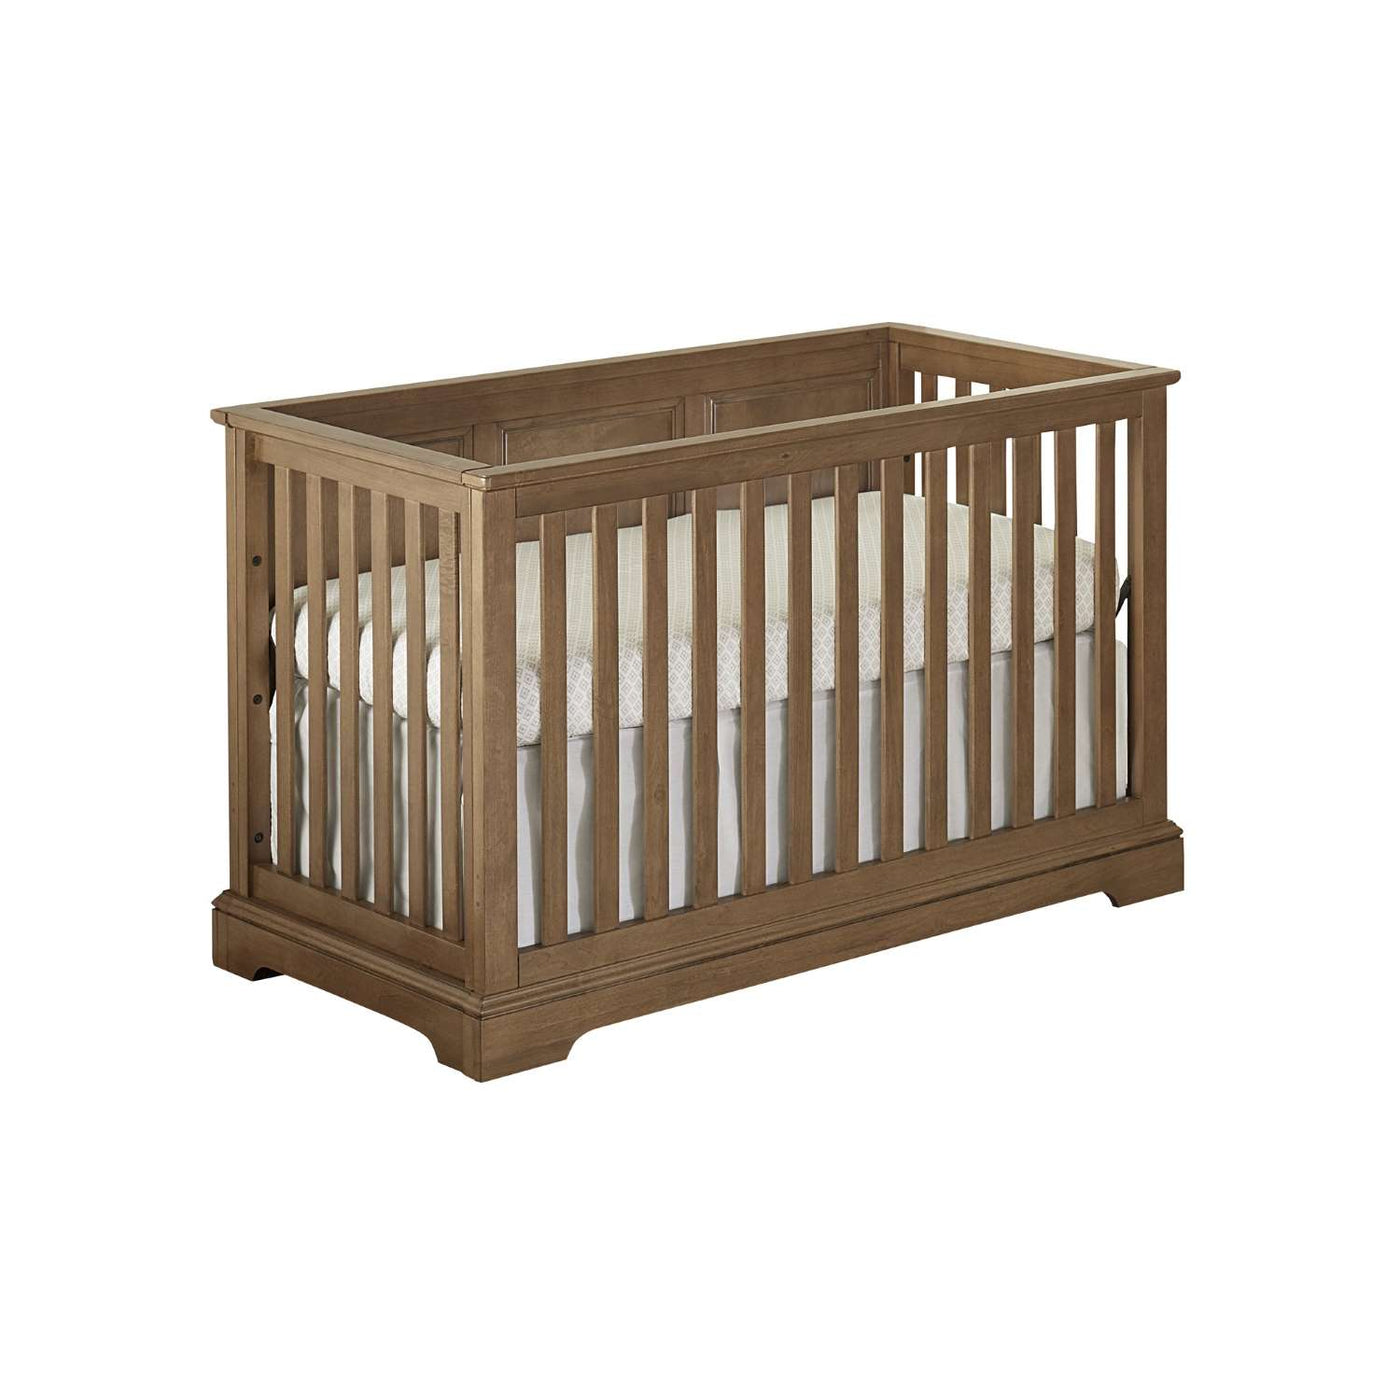 Hanley Cottage Crib with Toddler Guard Rail Package - Cashew